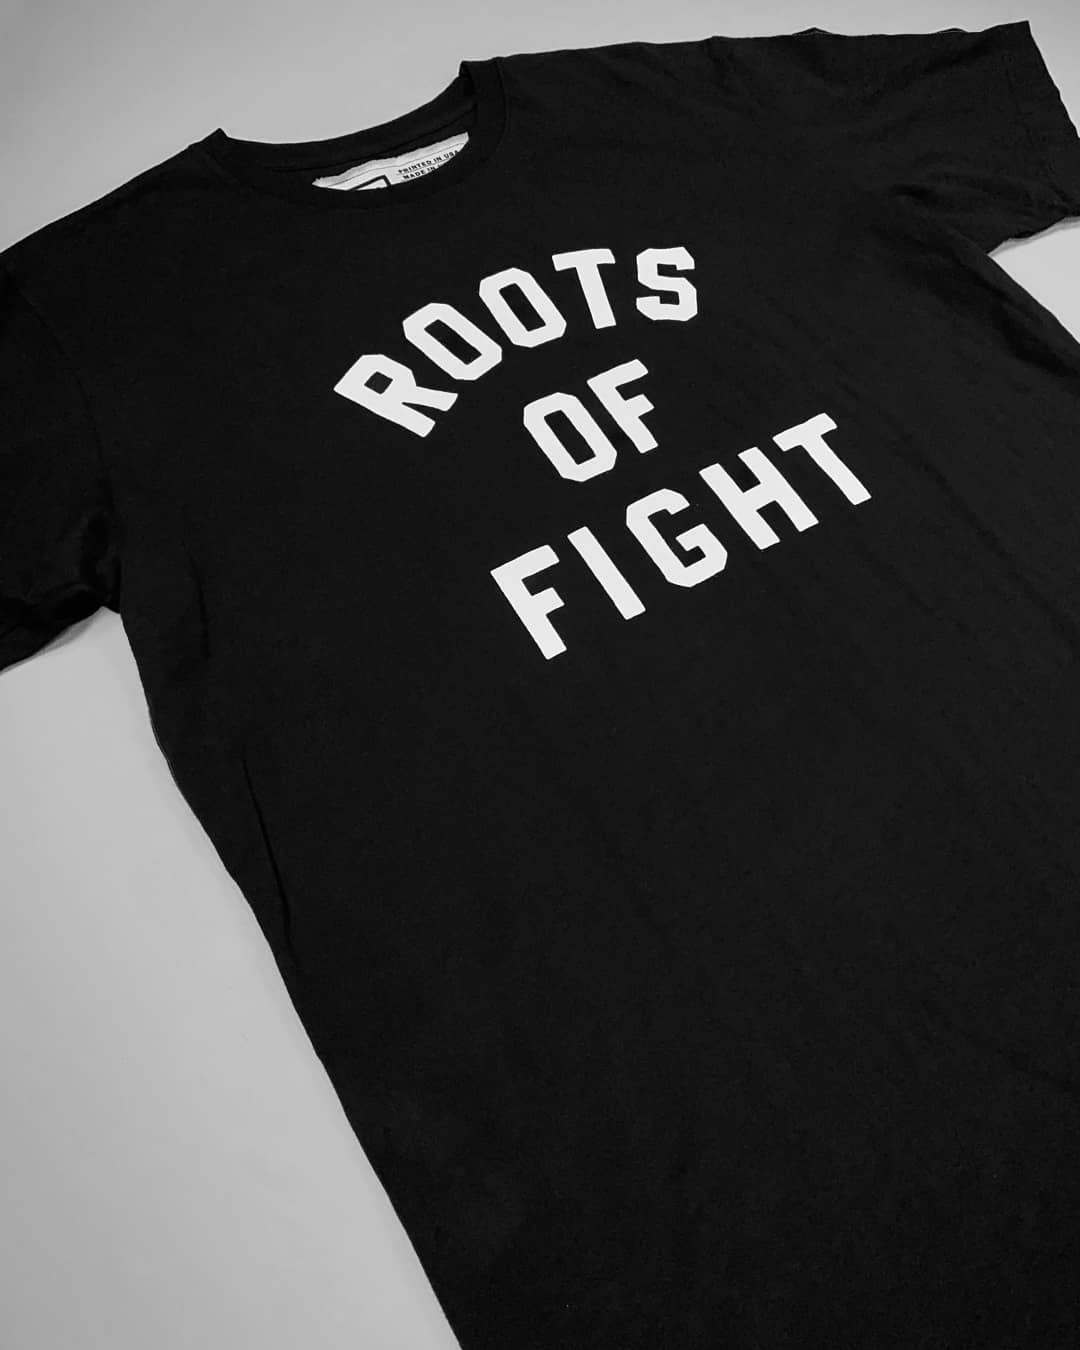 ROF Vintage Black Tee - Roots of Fight Canada